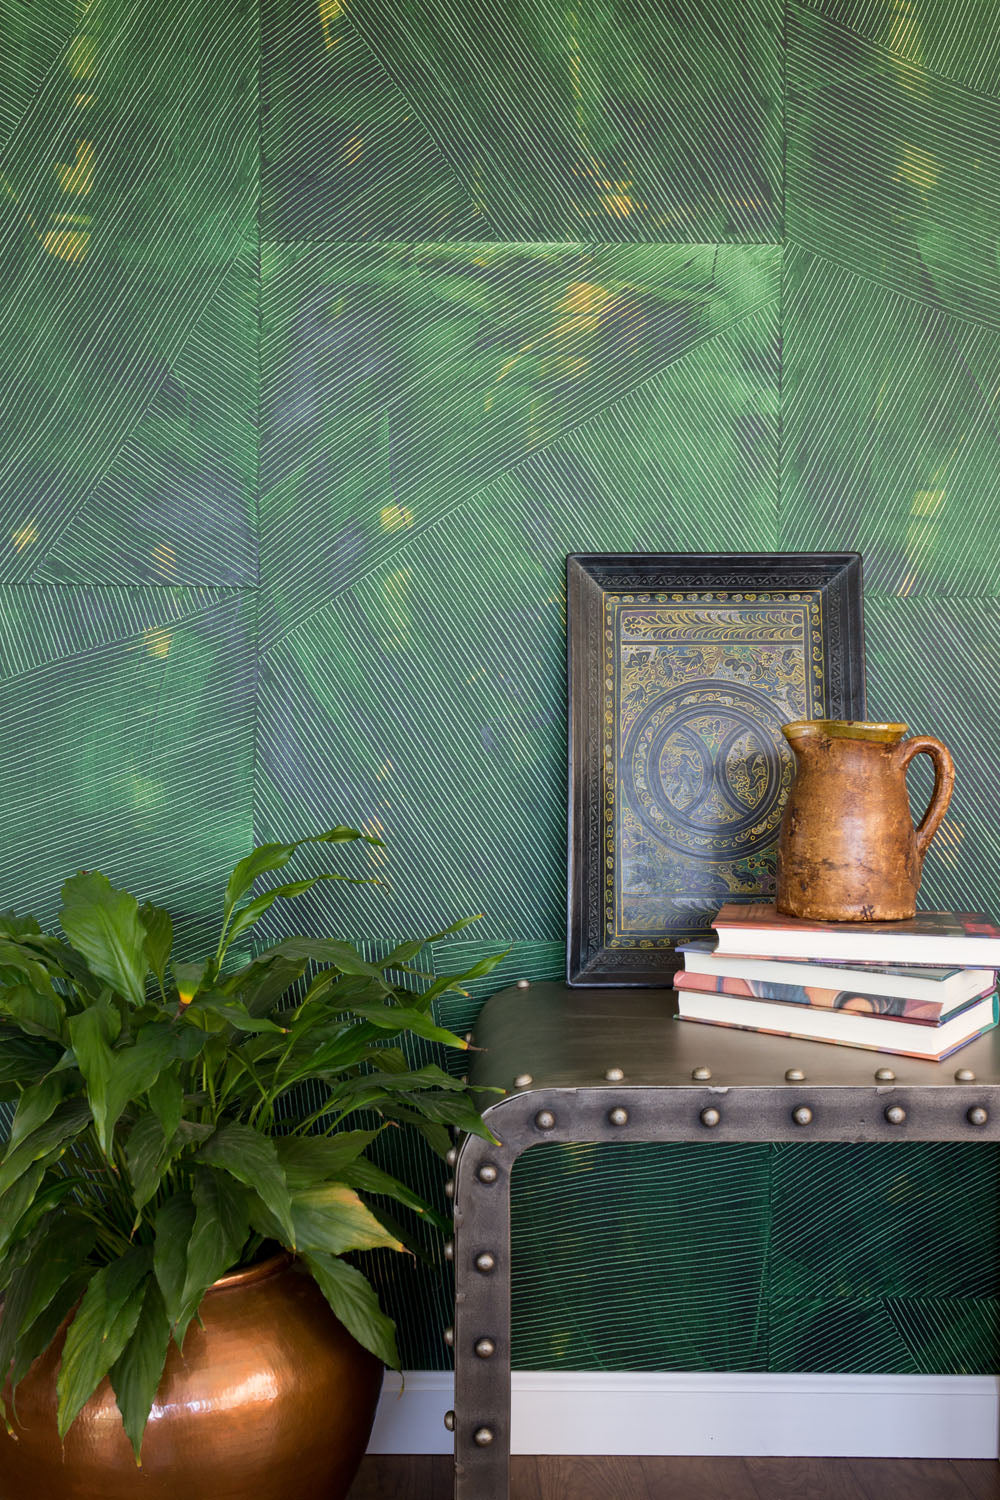 A large plant and an end table stand in front of a wall covered in multi-directional combed wallpaper in mottled green.